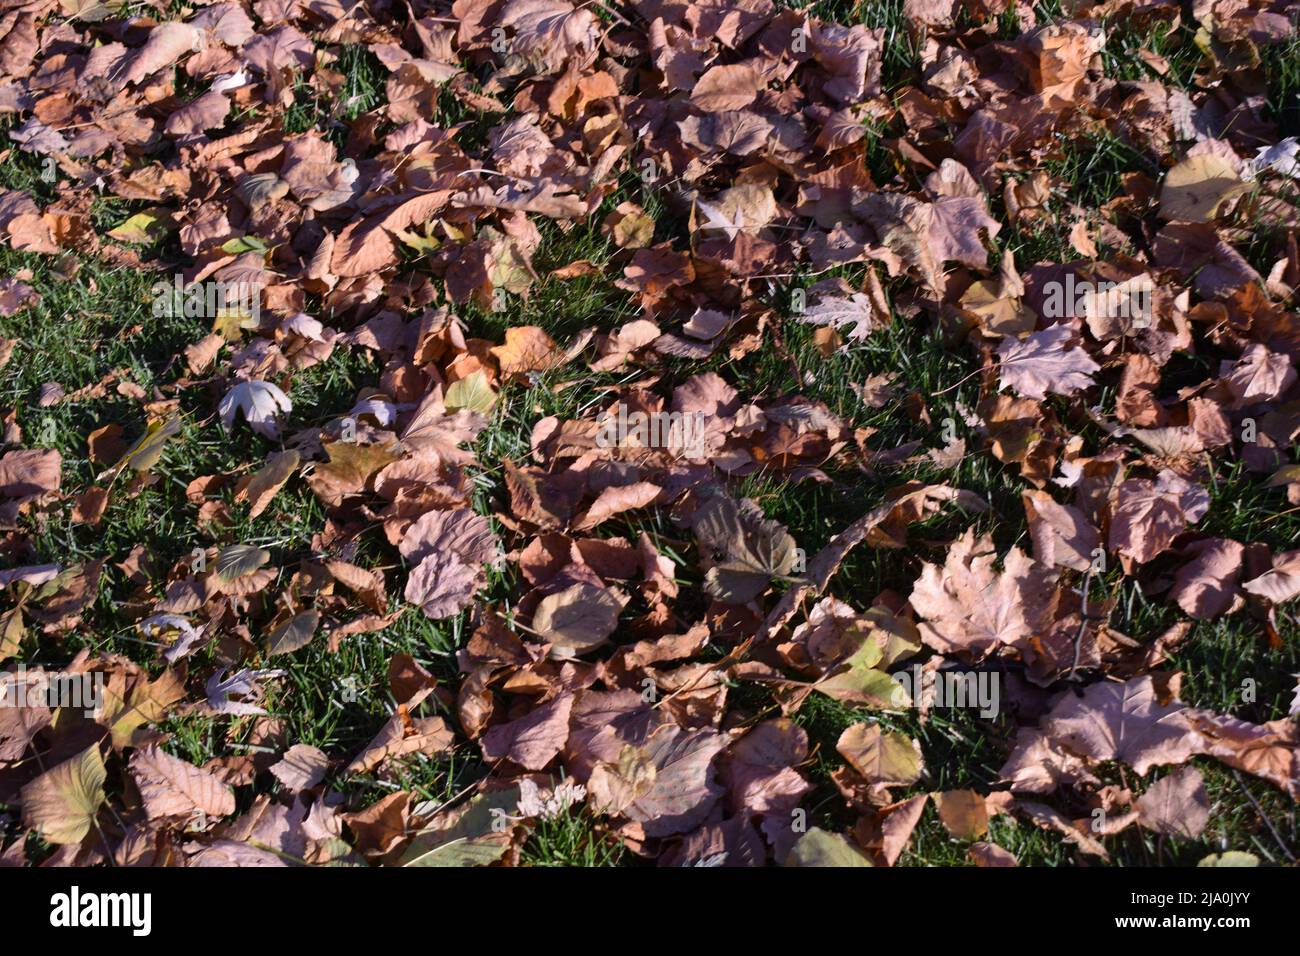 Background of colorful autumn leaves on forest ground. Fall orange and yellow autumn leaves on ground for background or backdrop. Dry brown and lush y Stock Photo